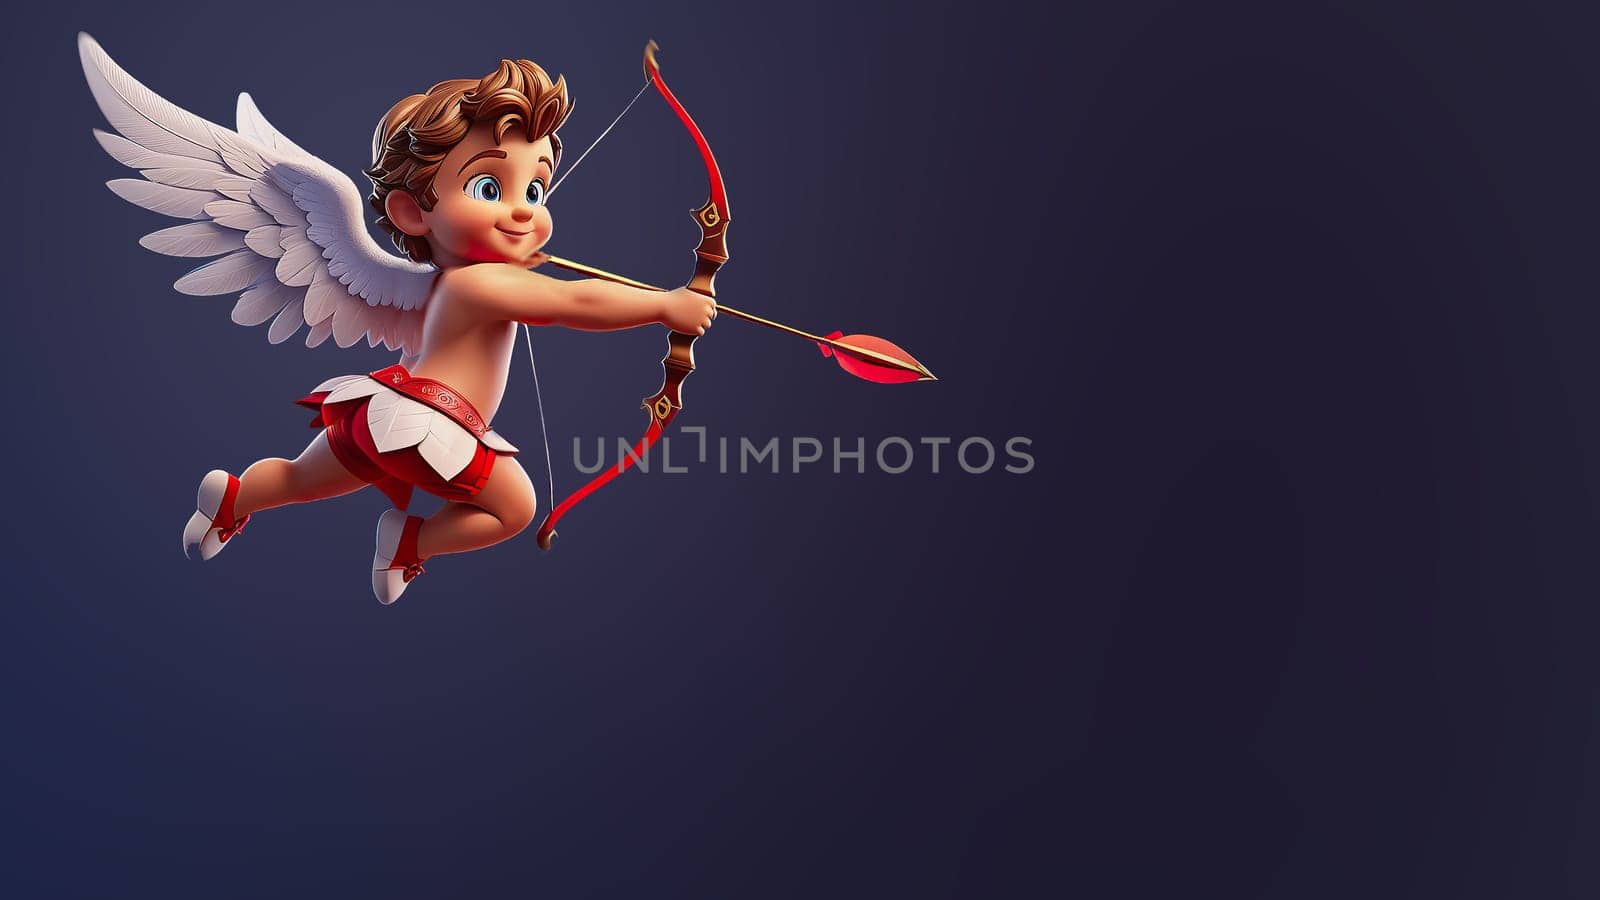 Adorable baby Cupid with bow and arrow, symbol of love, infatuation, dark background. Valentine's Day.